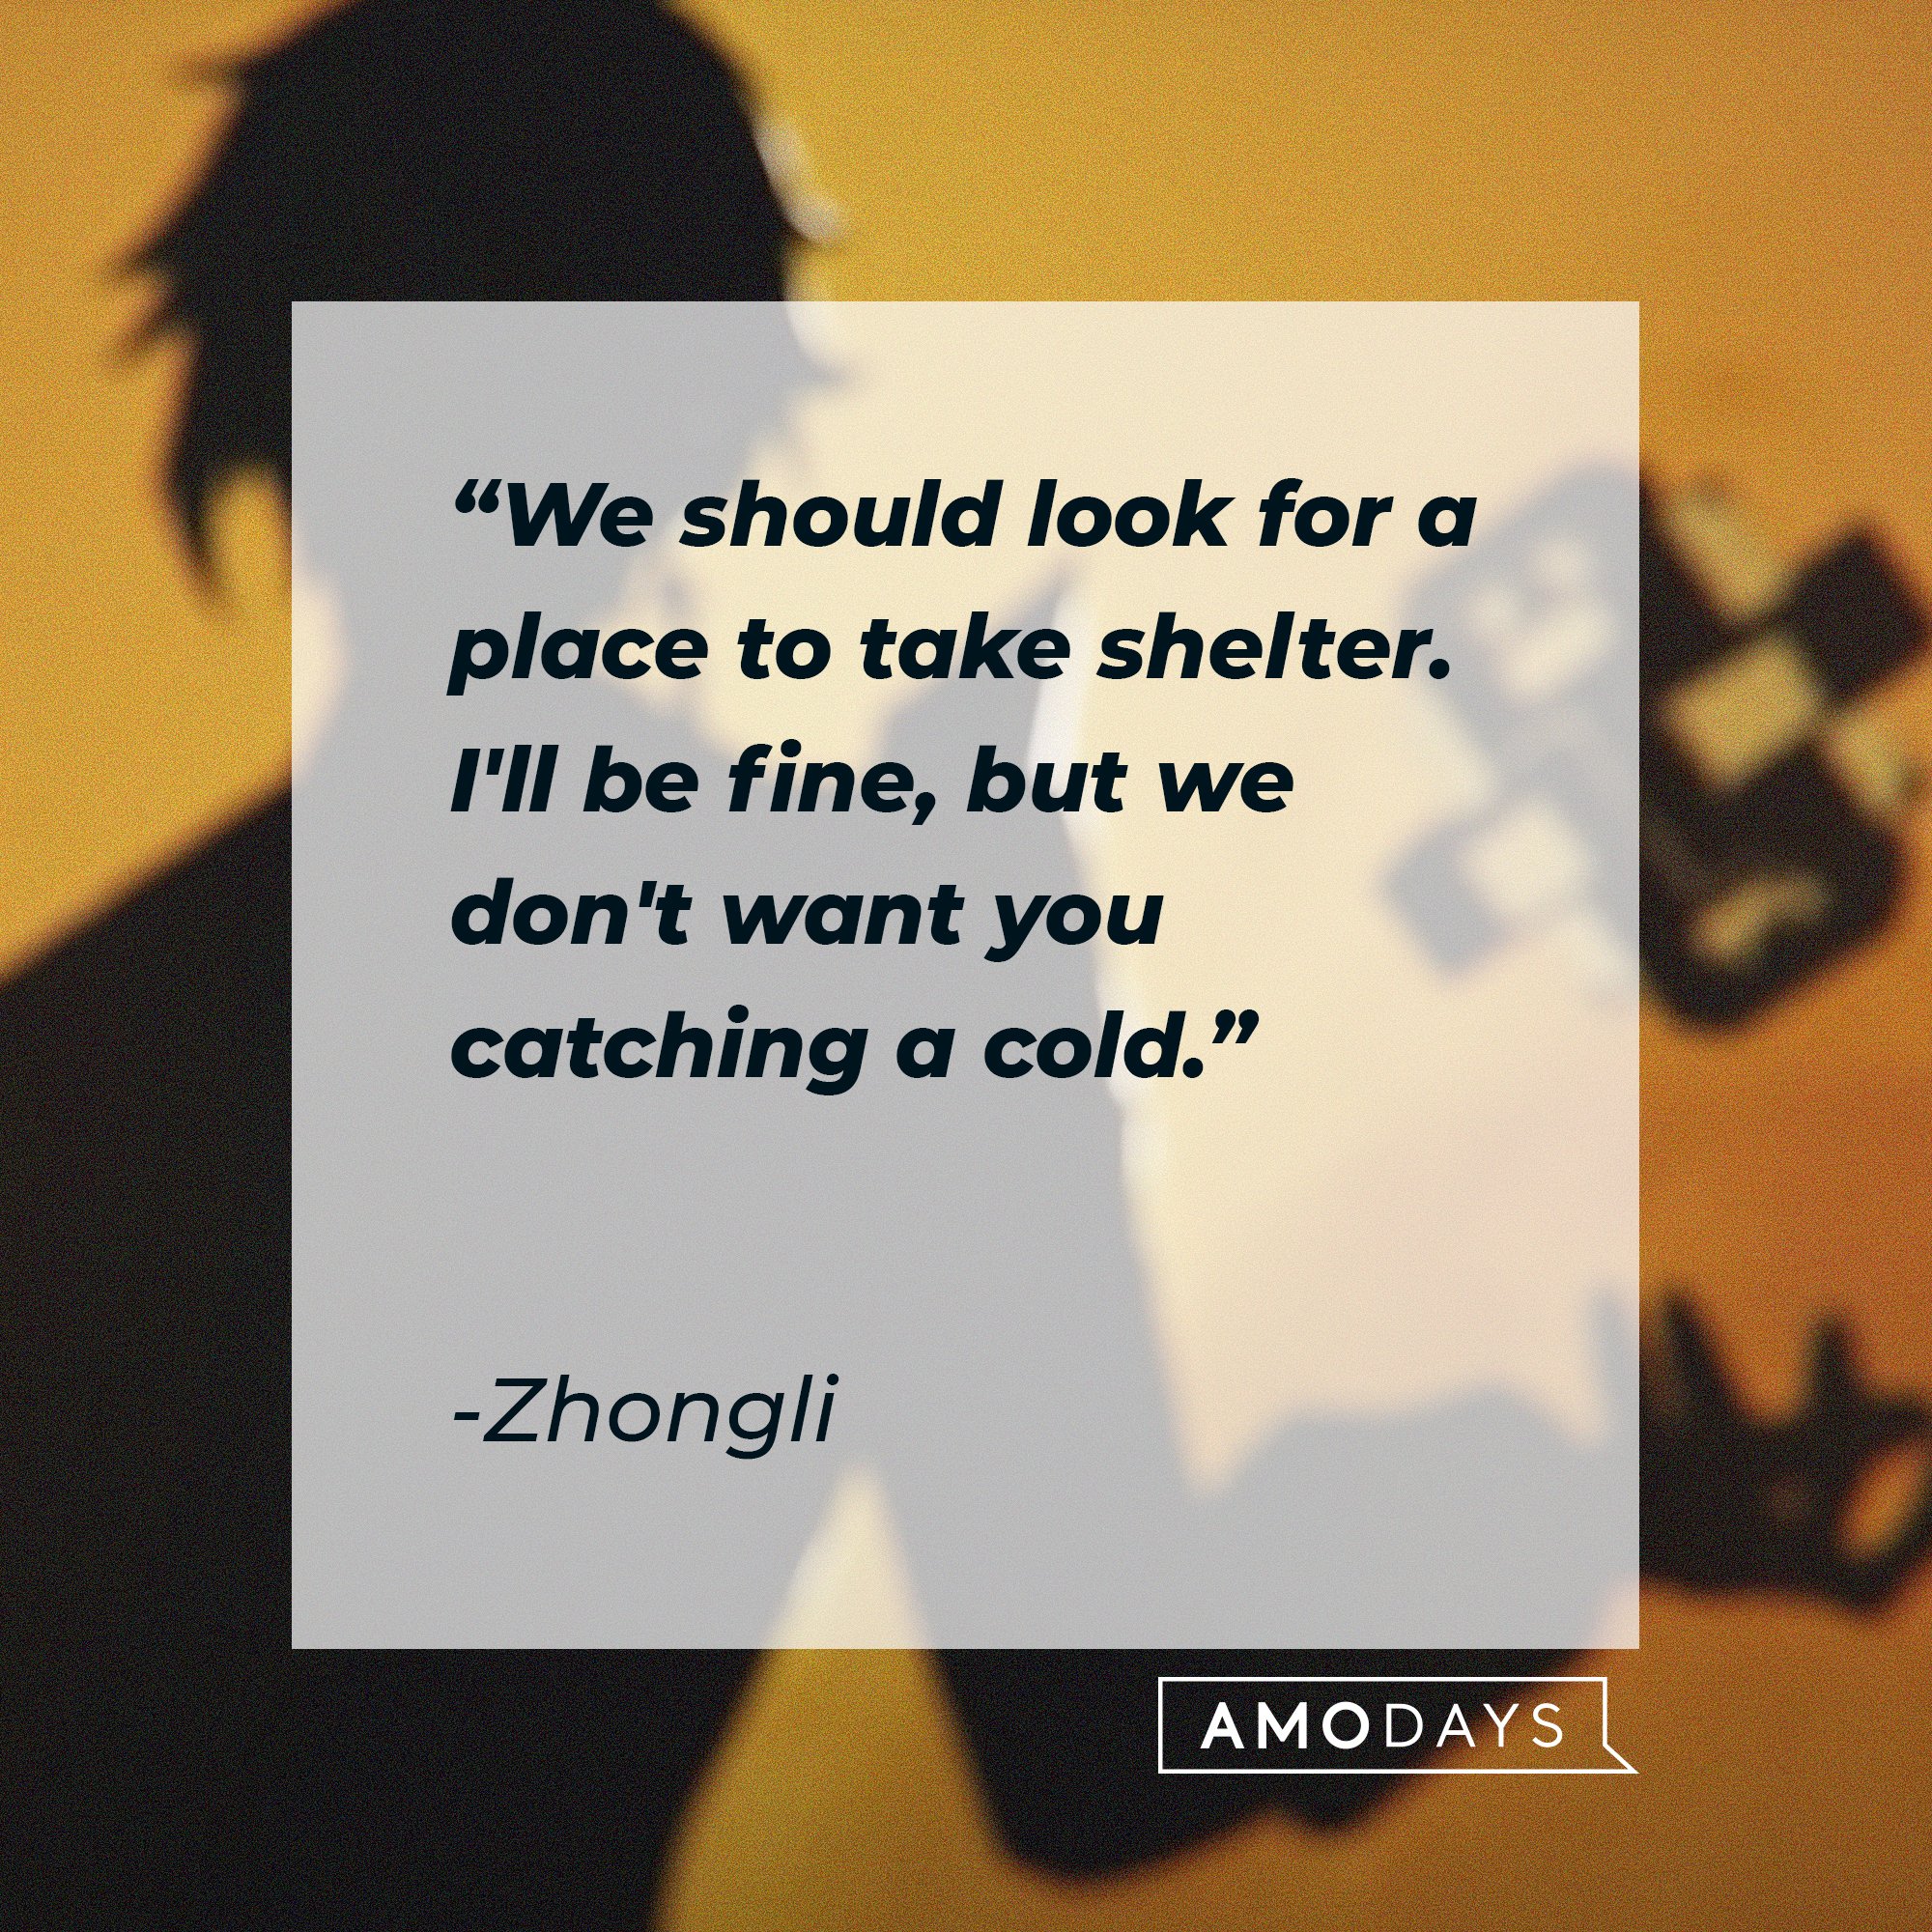 Zhongli’s quote: "We should look for a place to take shelter. I'll be fine, but we don't want you catching a cold." | Image: AmoDays